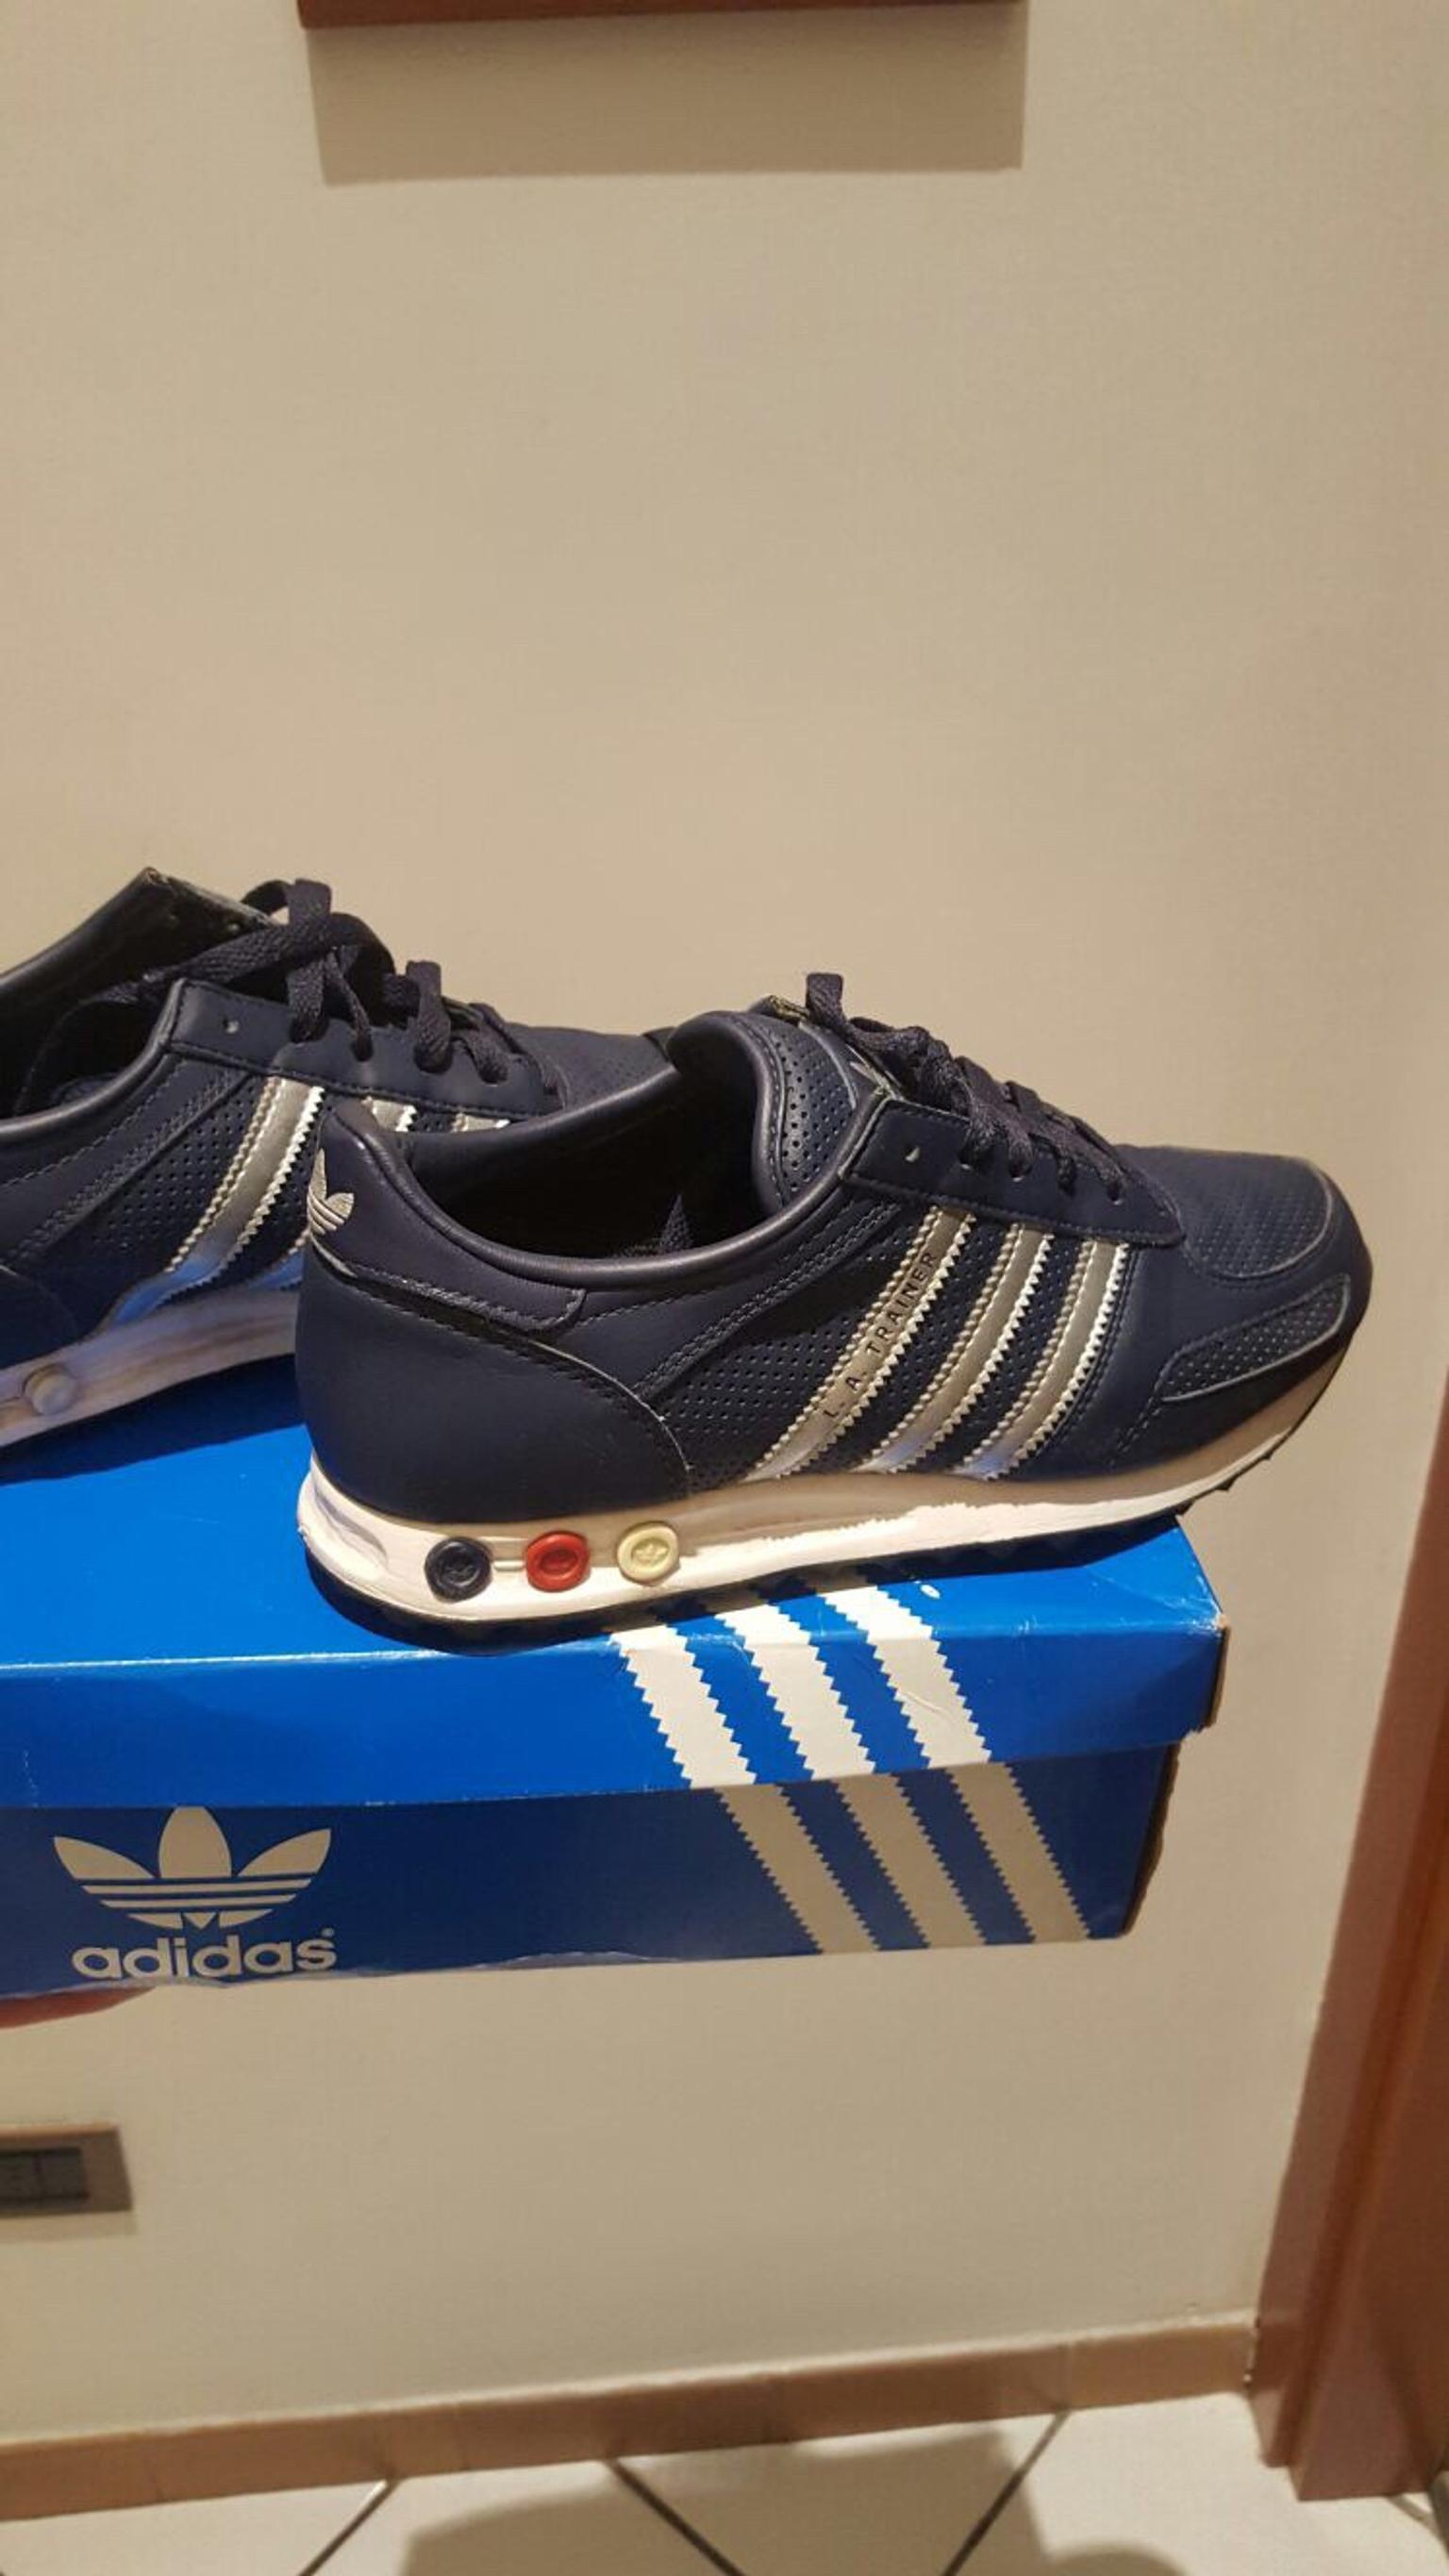 Adidas trainer donna in 80126 Napoli for €25.00 for sale | Shpock